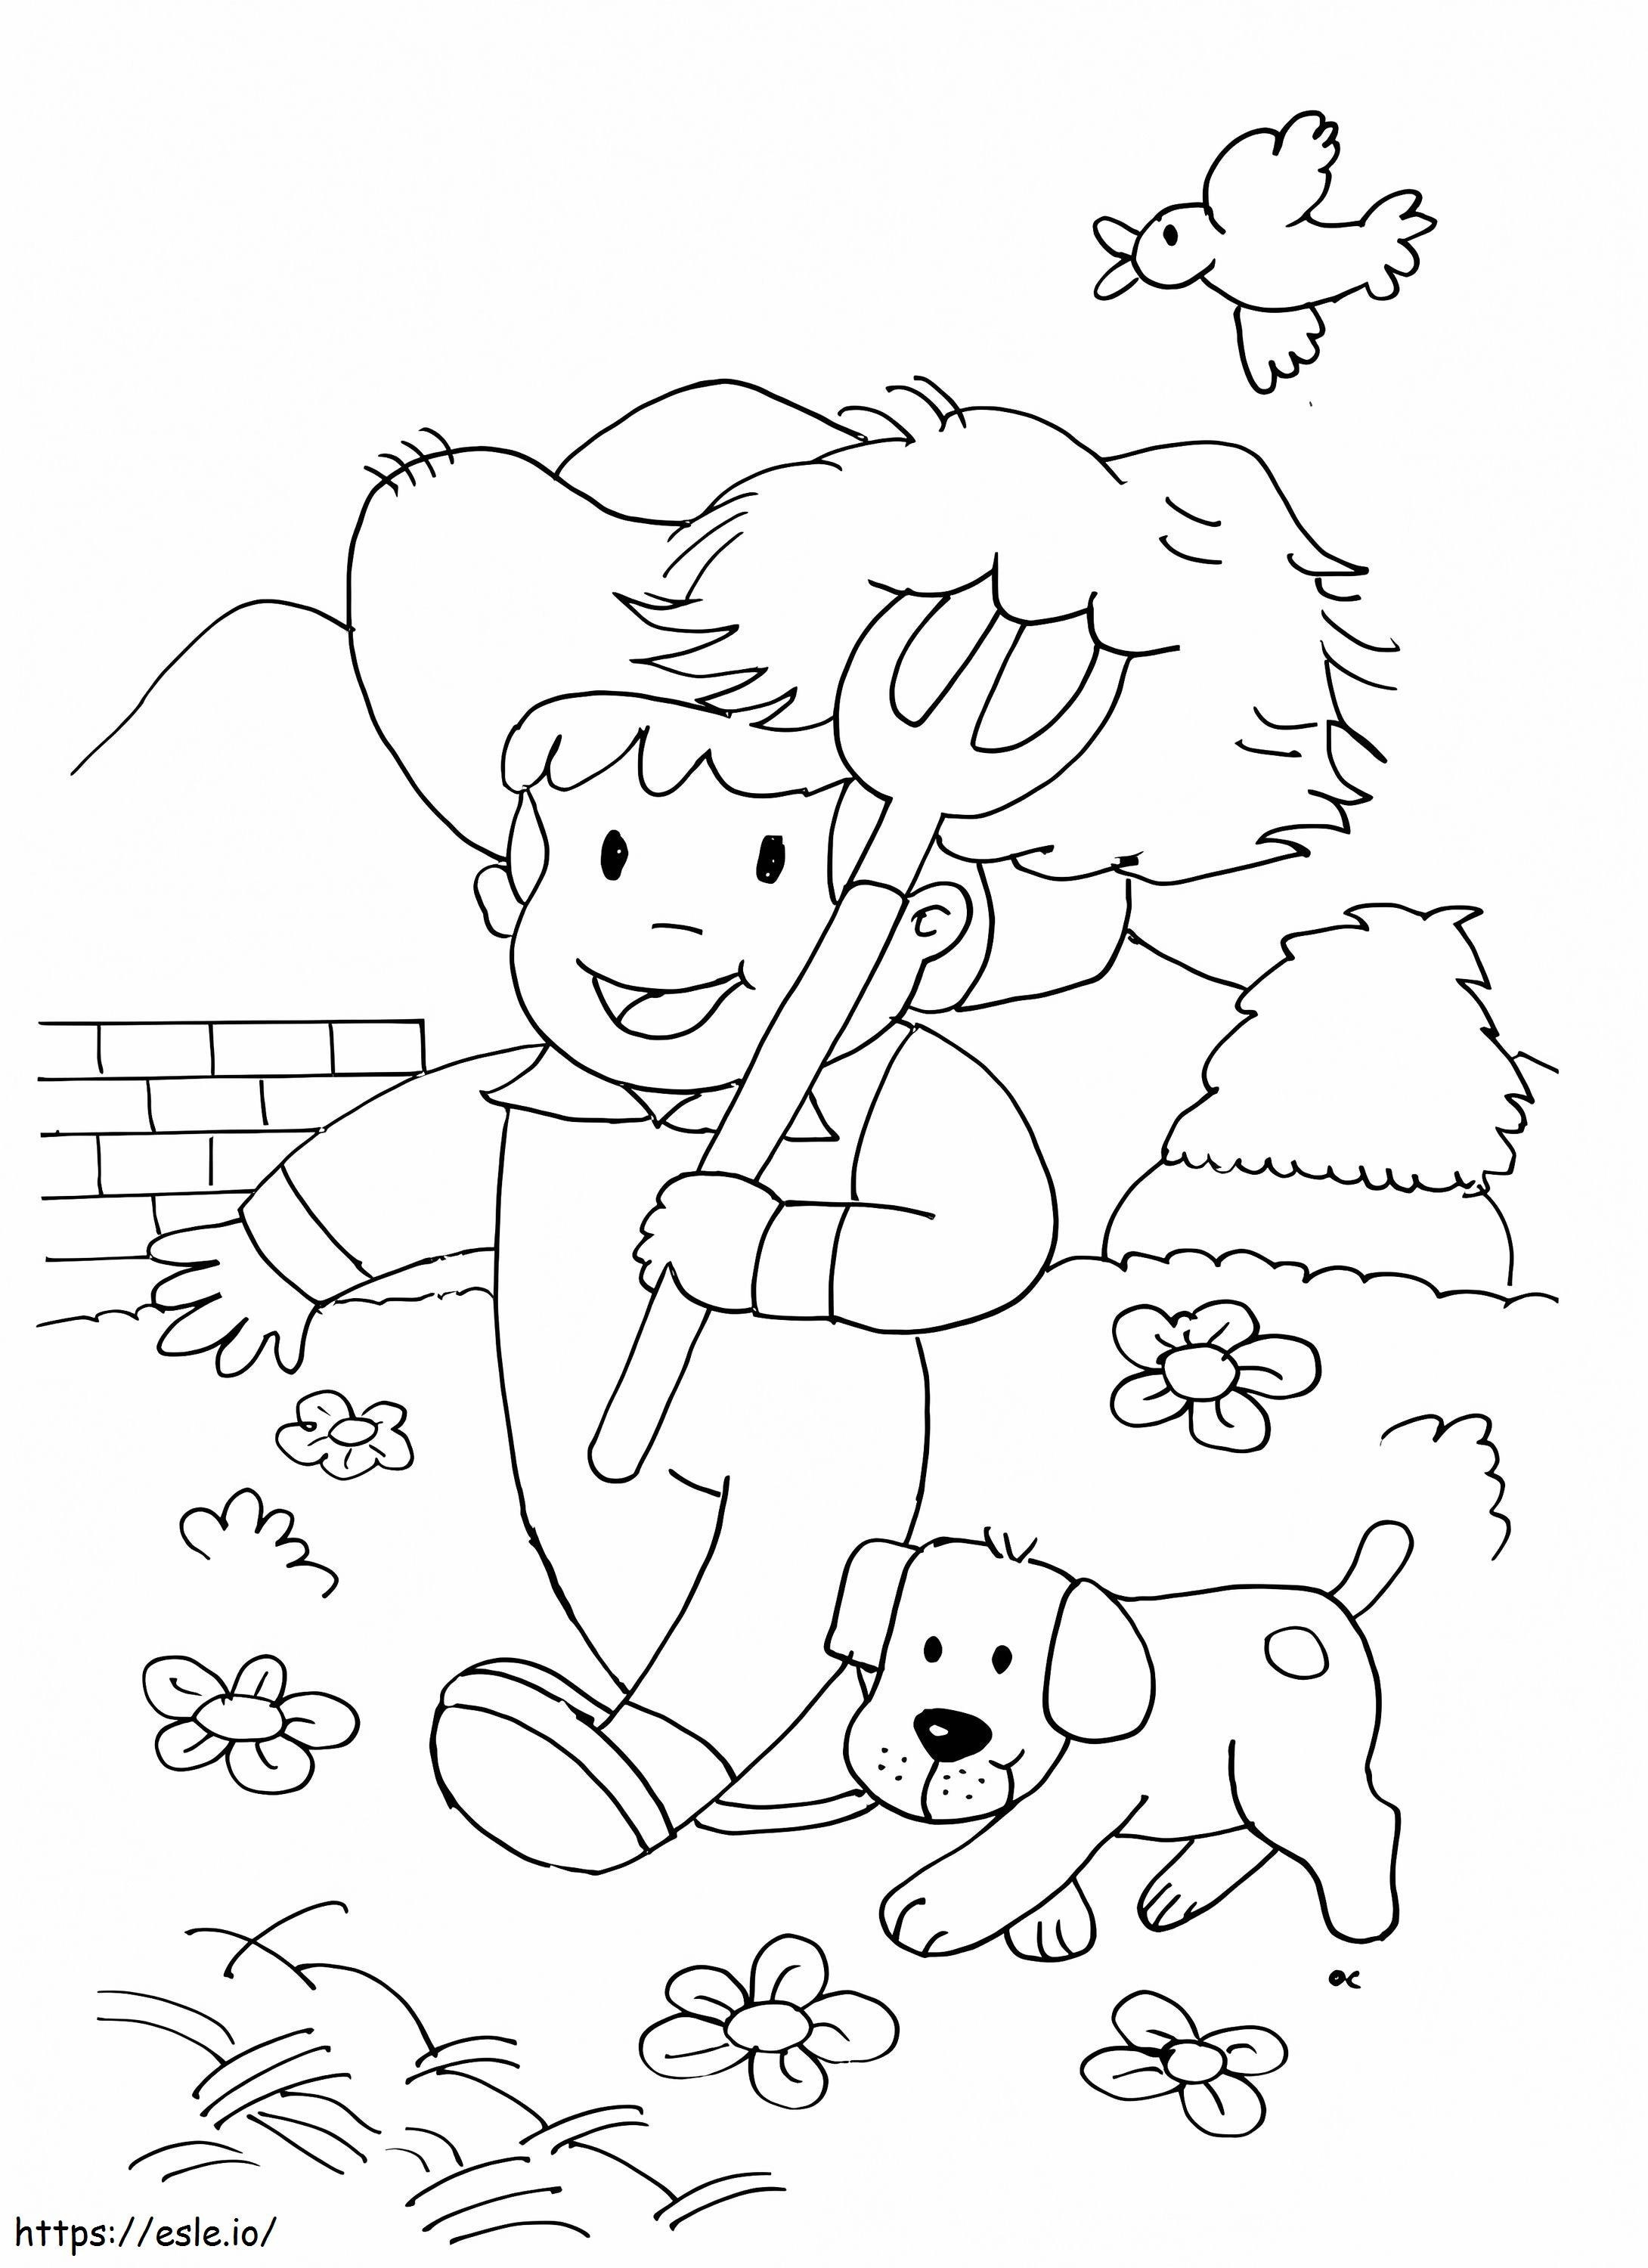 A Little Farmer coloring page